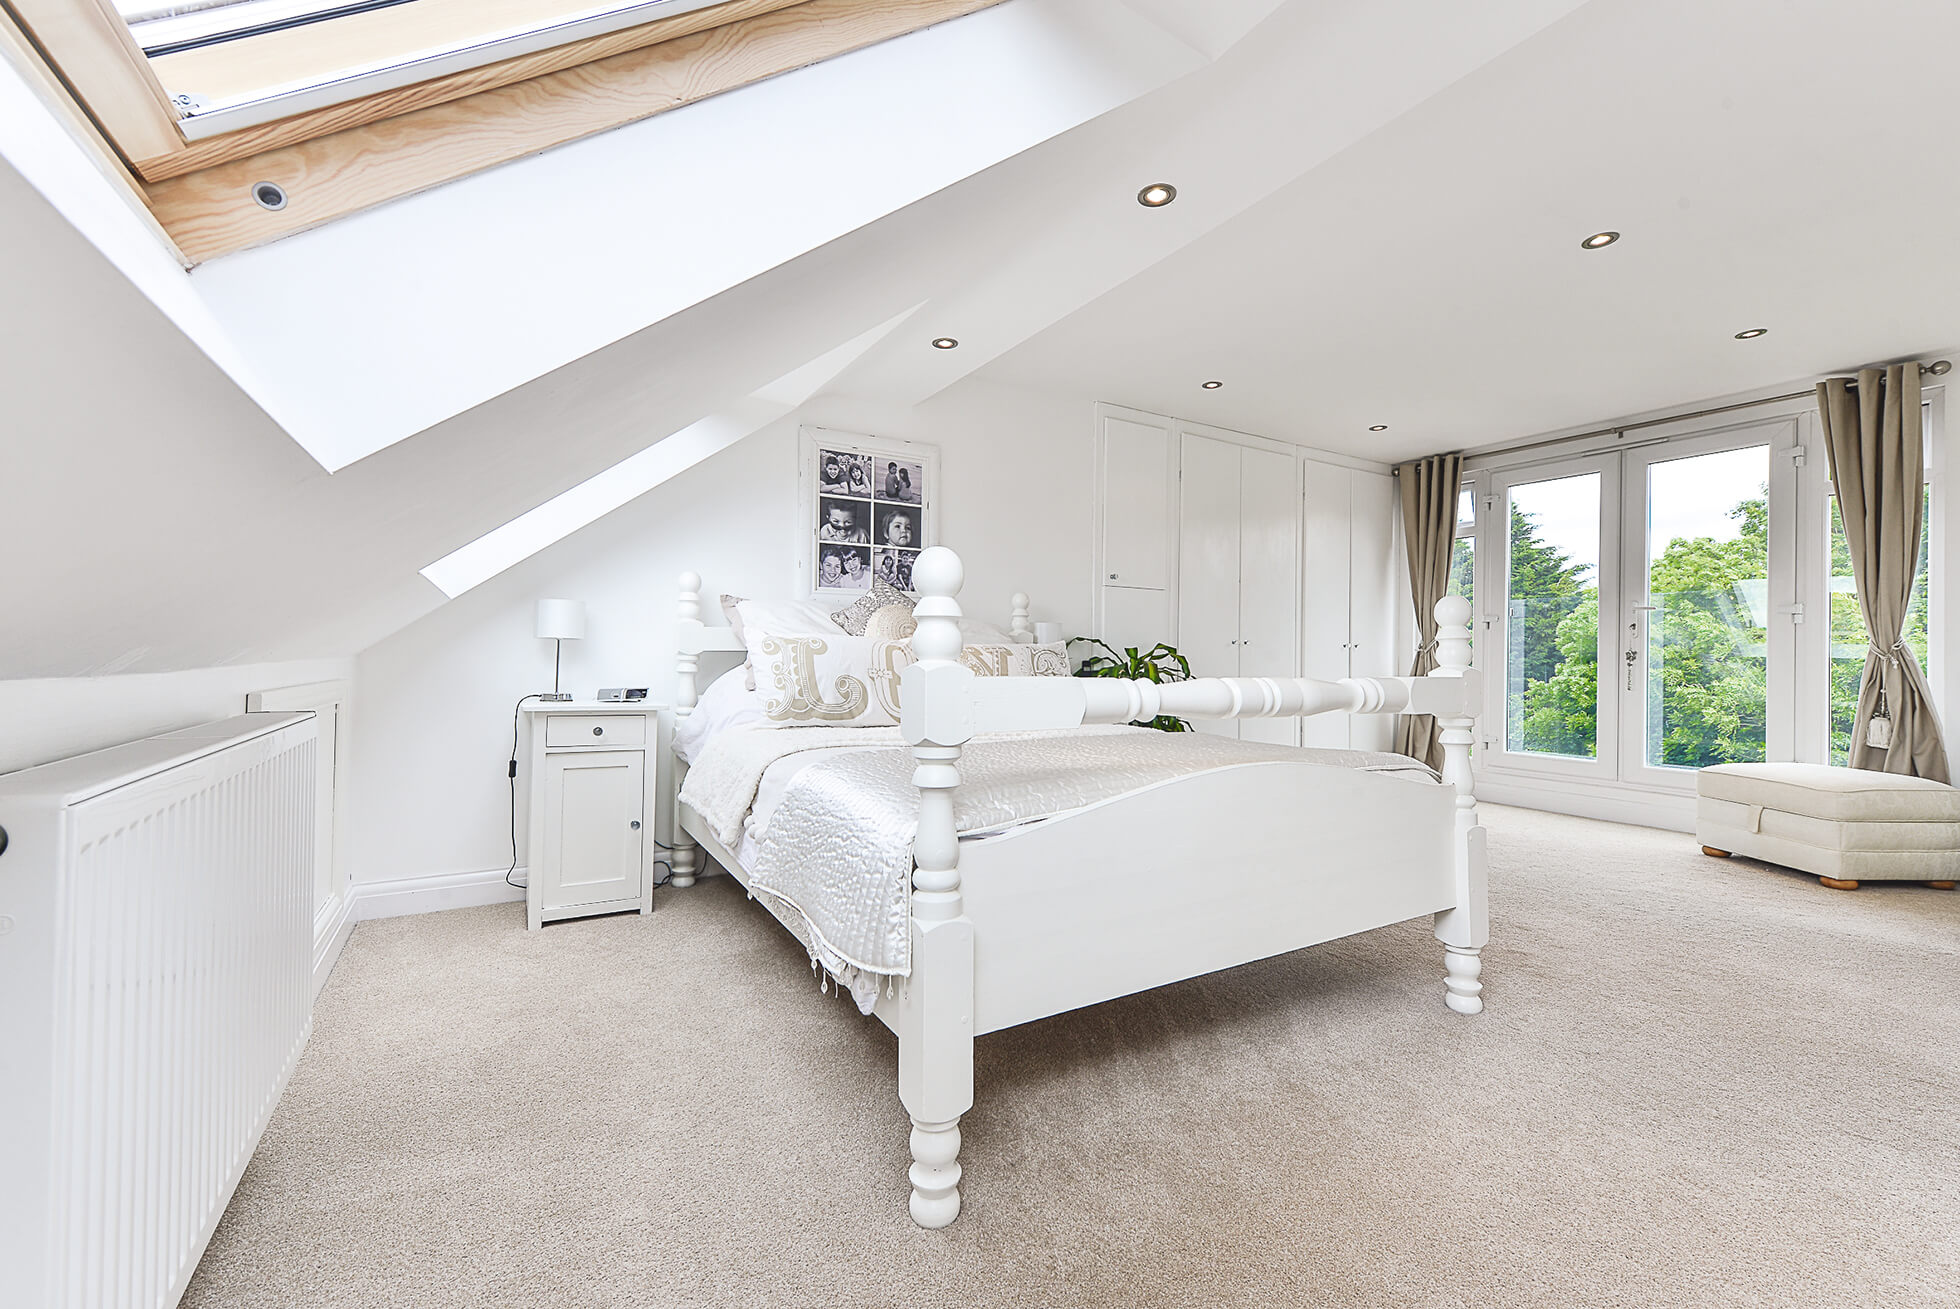 Do you have a question about converting your Loft in Letchworth Garden City? Here are the most popular questions asked by our clients.